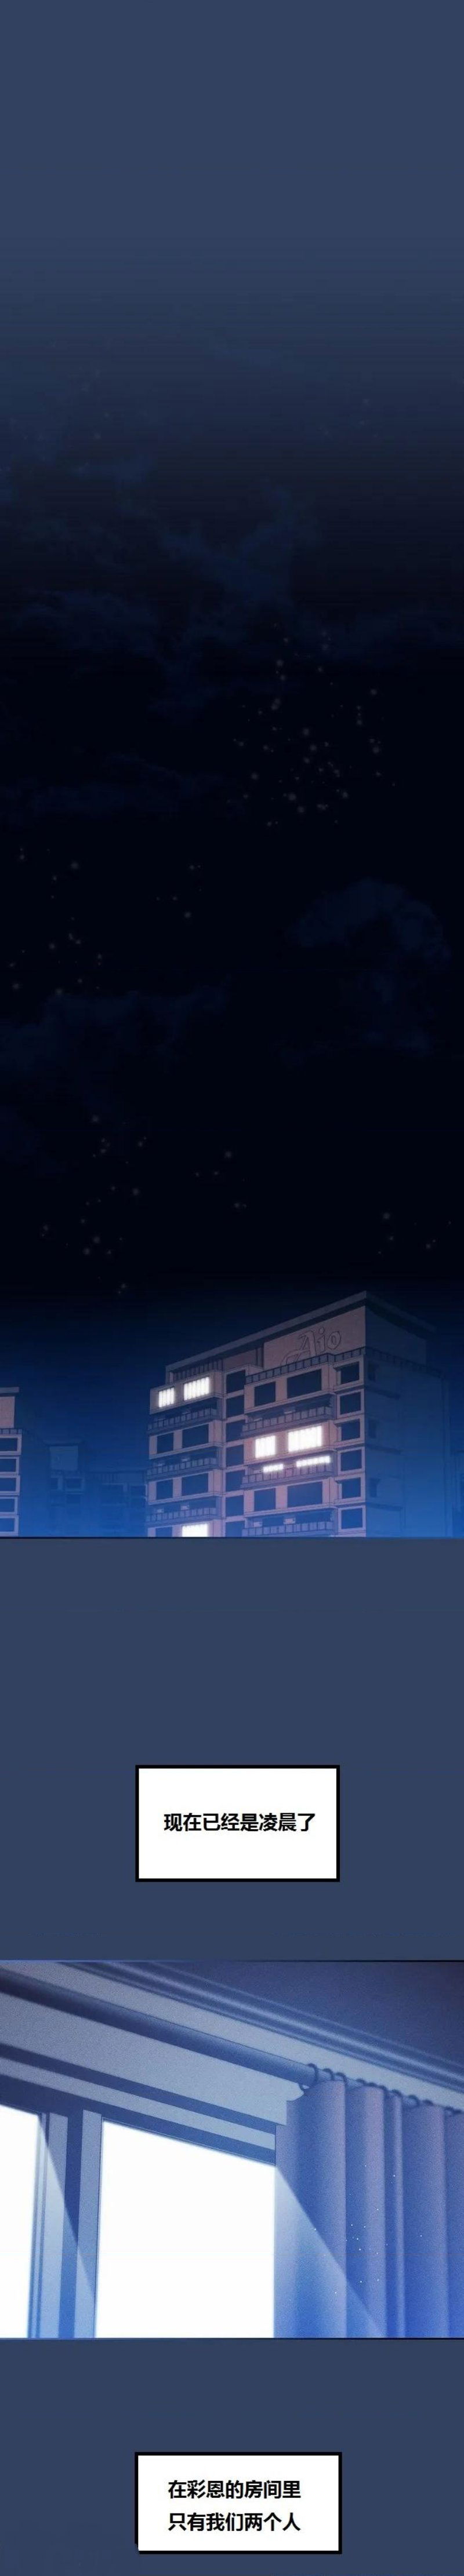 private-tutoring-in-pandemic-raw-chap-39-0